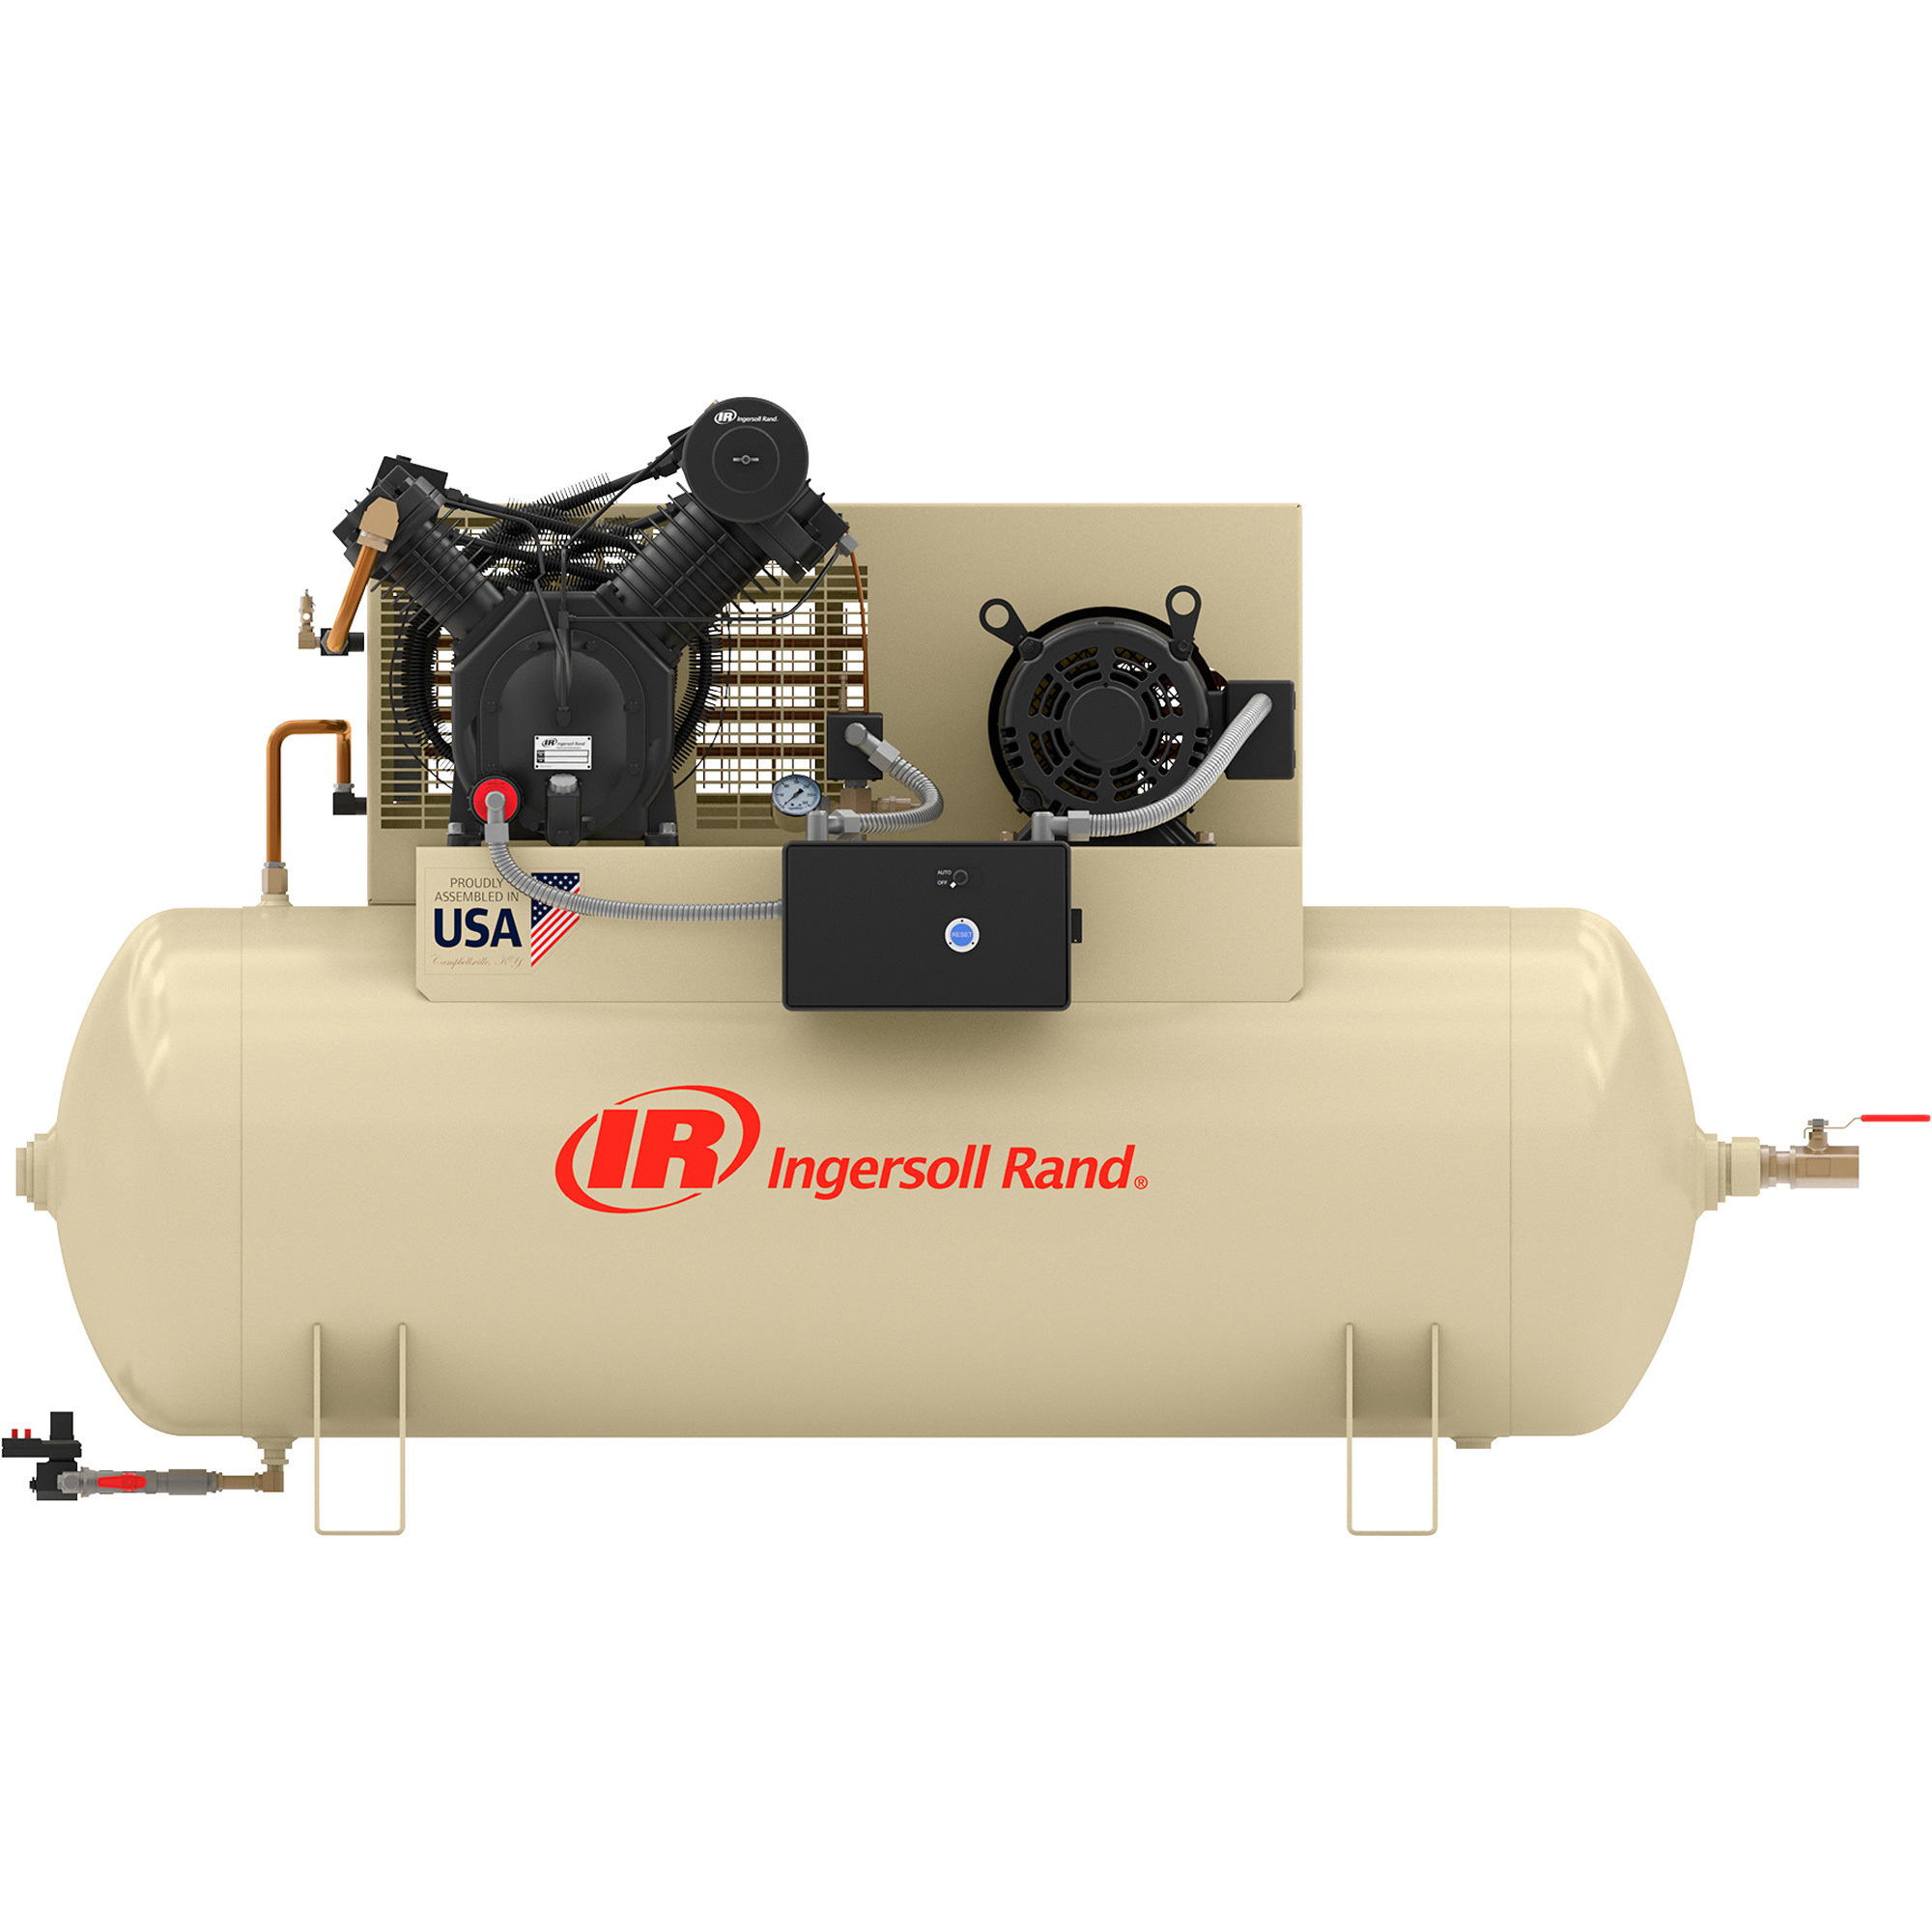 Ingersoll Rand Electric Stationary Air Compressor (Fully Packaged), 15 HP, 460 Volts, 3 Phase, 120 Gallon Horizontal, 50 CFM At 175 PSI, Model 7100E15